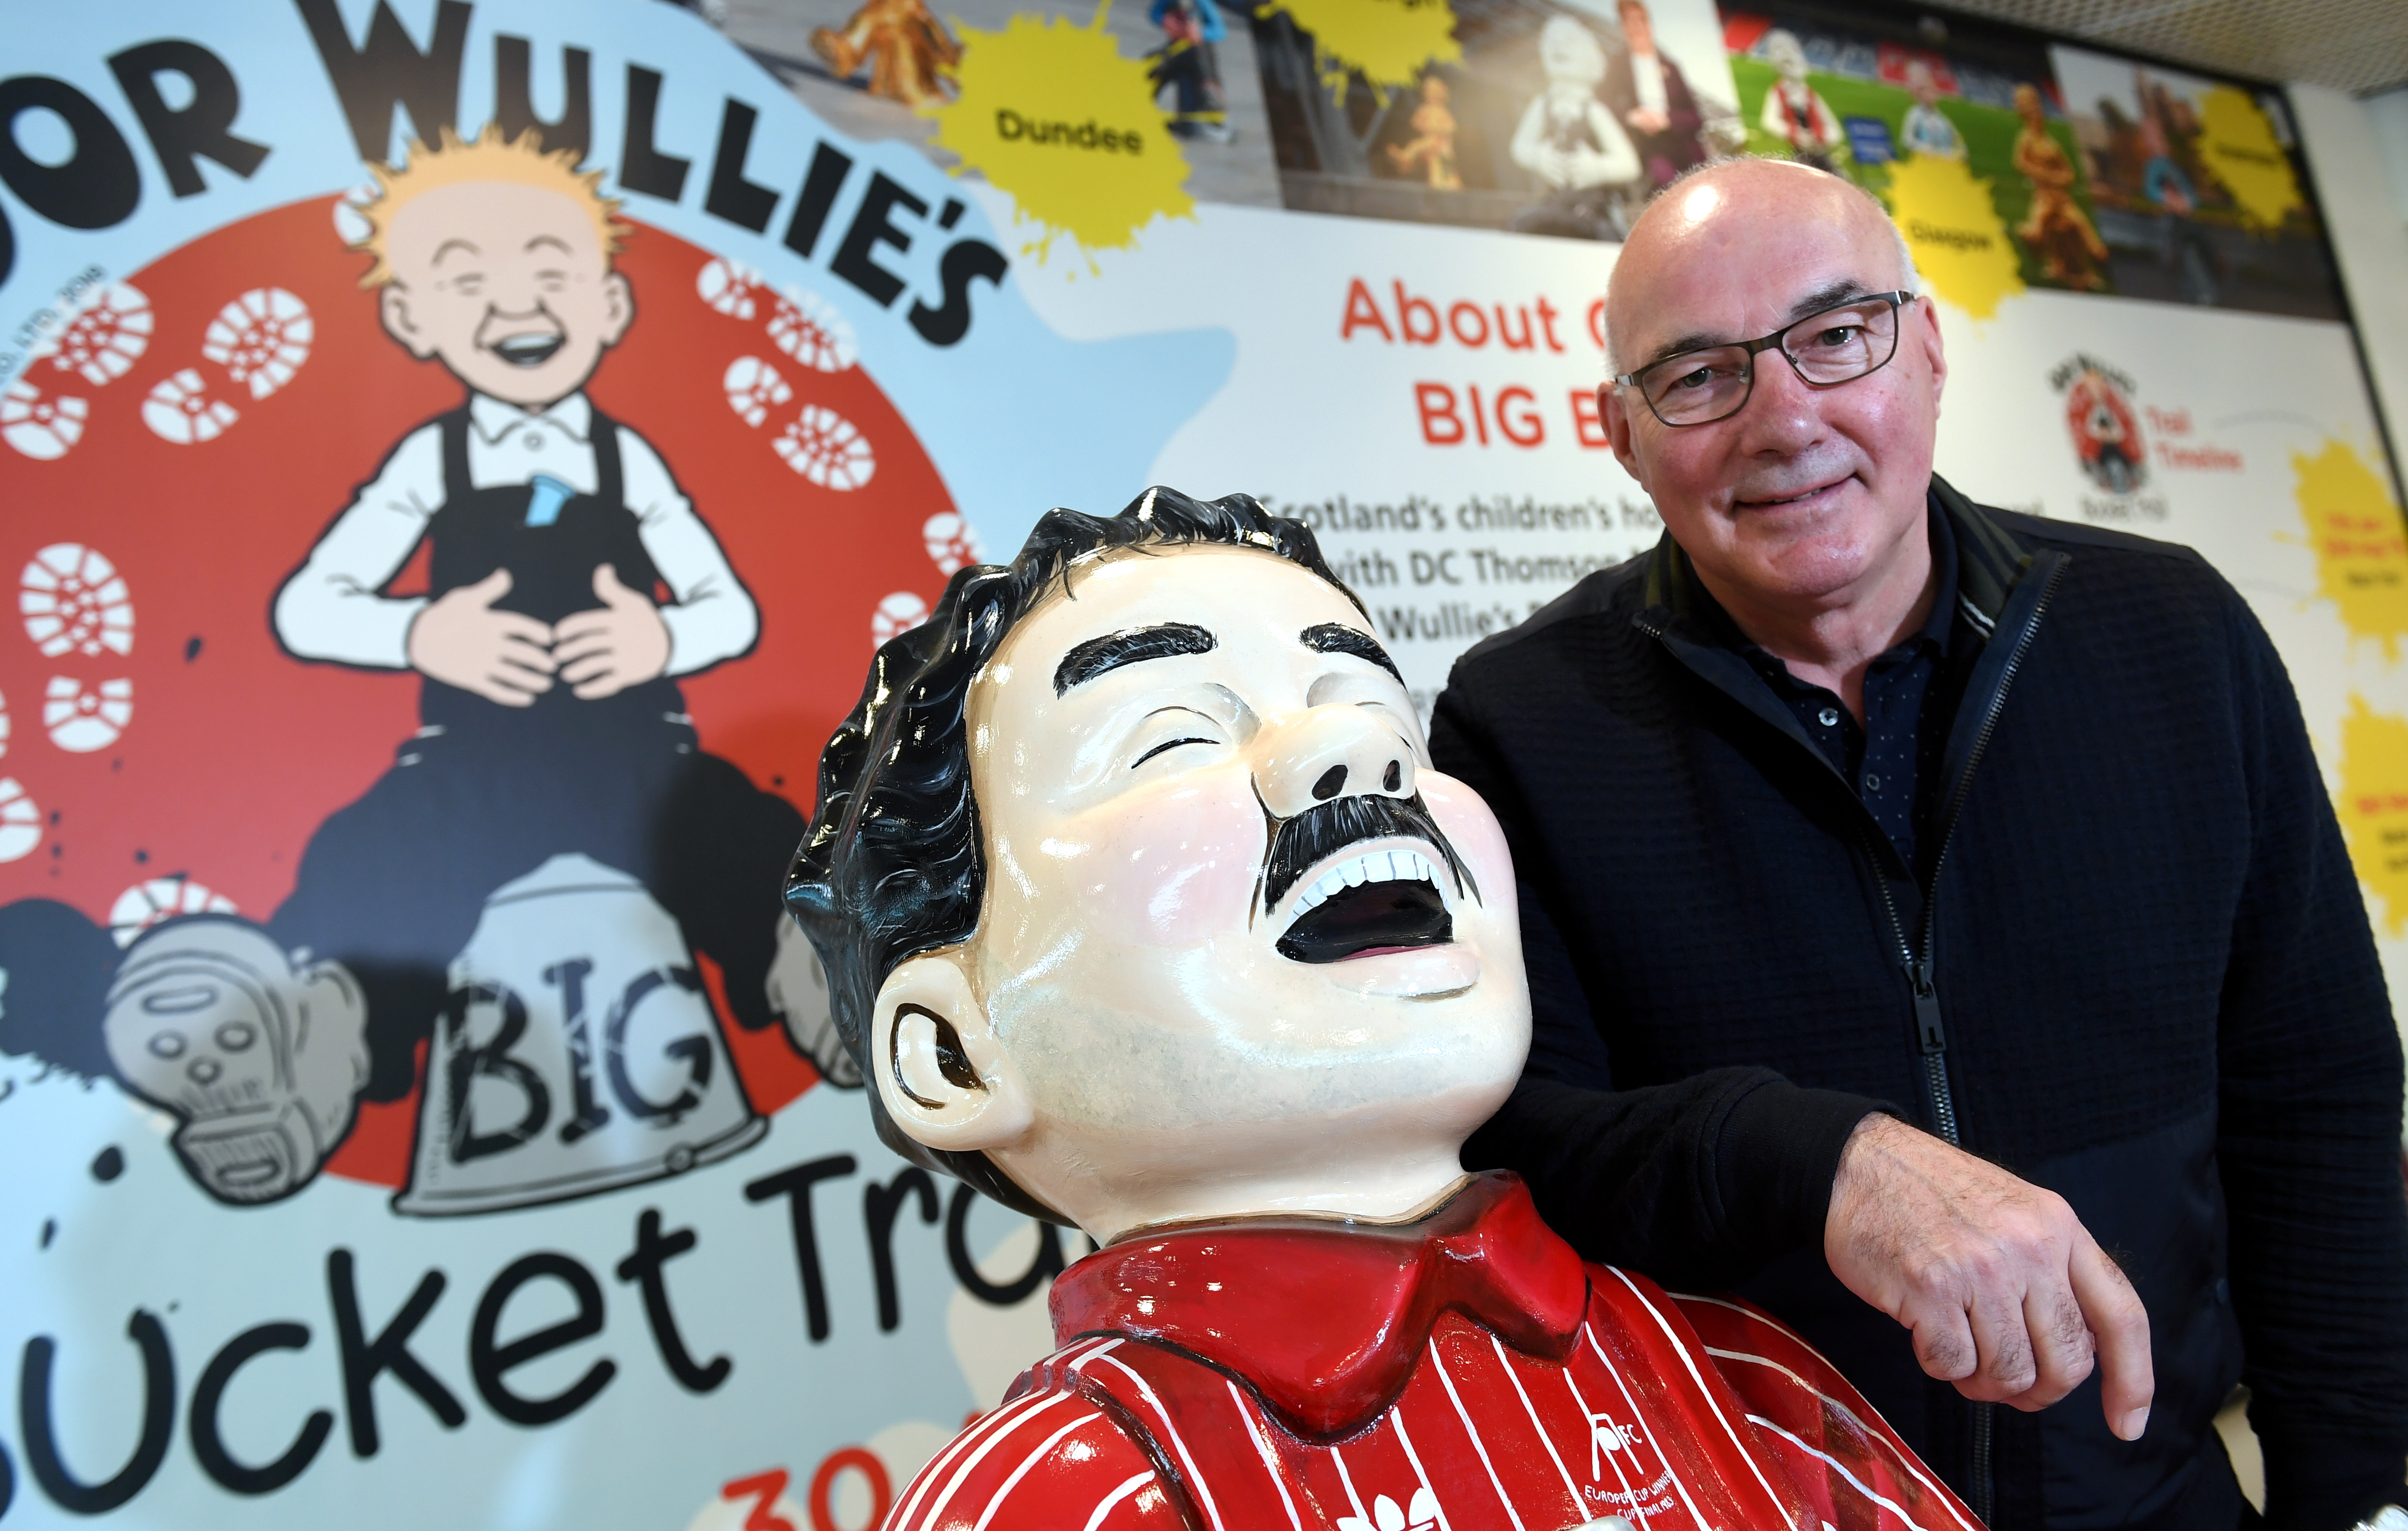 CR0010263
Former Dons captain Willie Miller visited the Oor Wullie Bucket Trail shop in the Bon Accord centre today (wednesday) to sign the sculpture by artist Sarah Mauchline that will be displayed and auctioned for the Archie Foundation.       
Pictured - Willie Miller with the Oor Wullie Miller statue.      
Picture by Kami Thomson    12-06-19